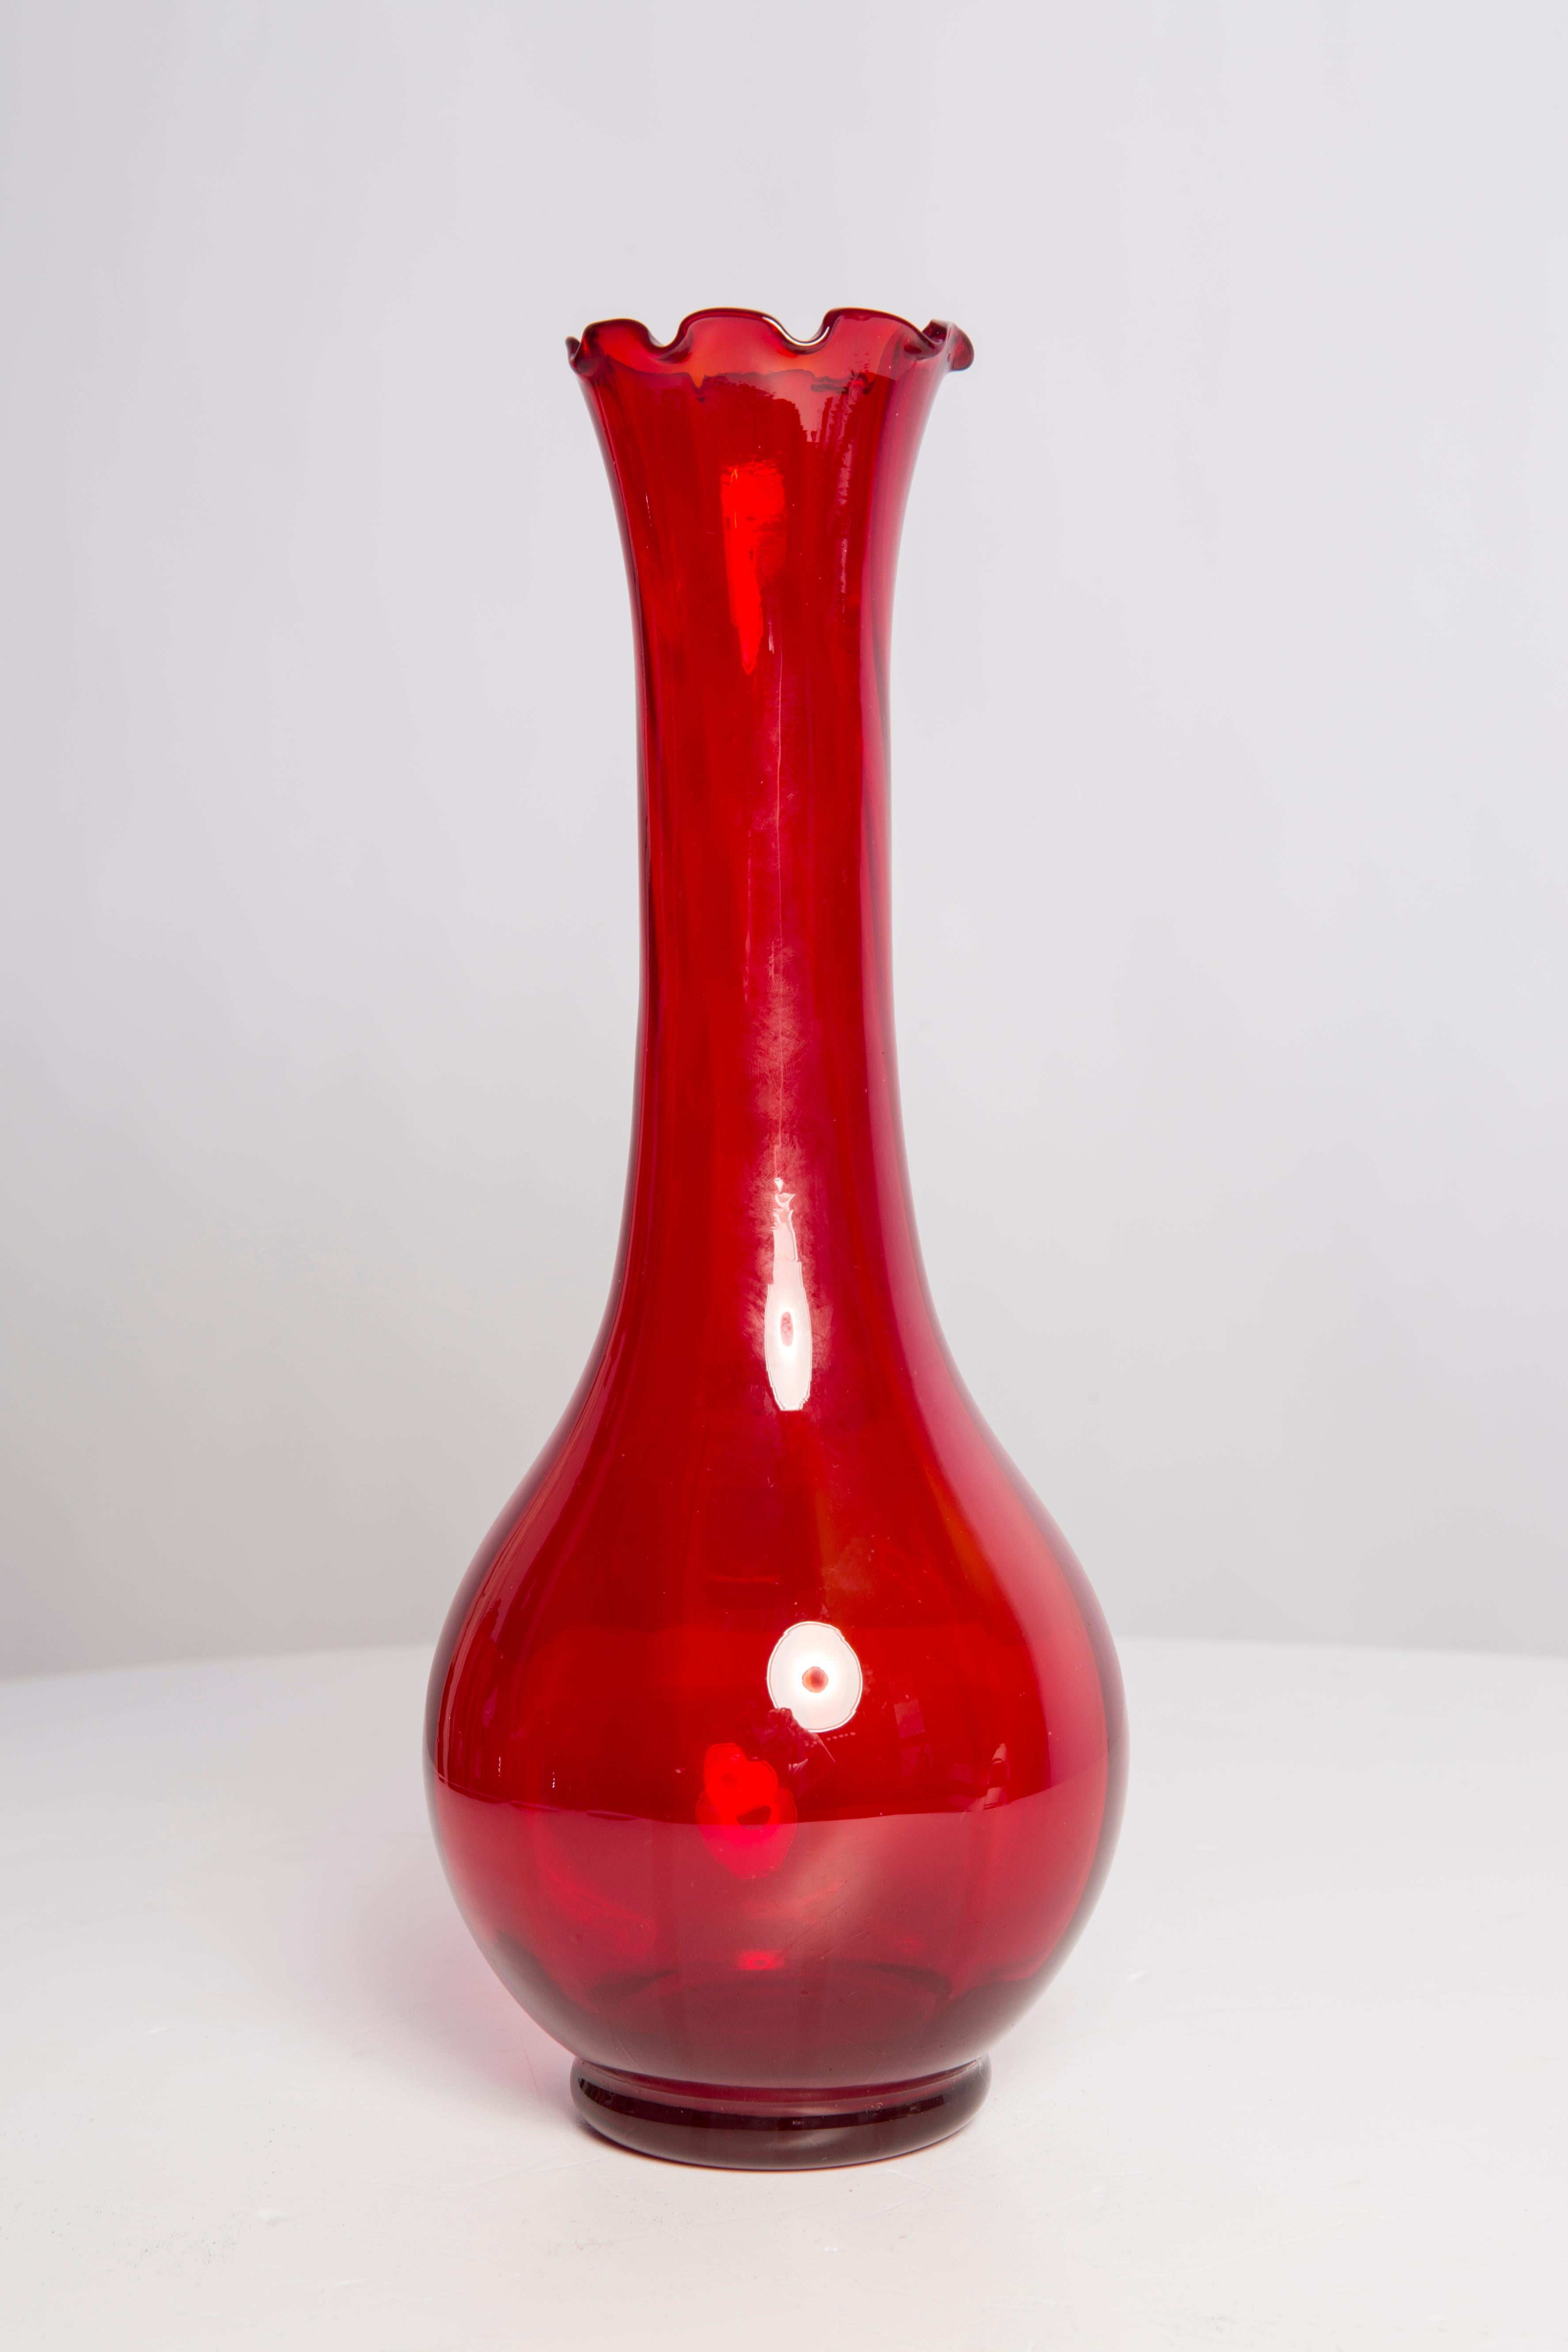 20th Century Midcentury Glass Red Vase with a Frill, Europe, 1960s For Sale